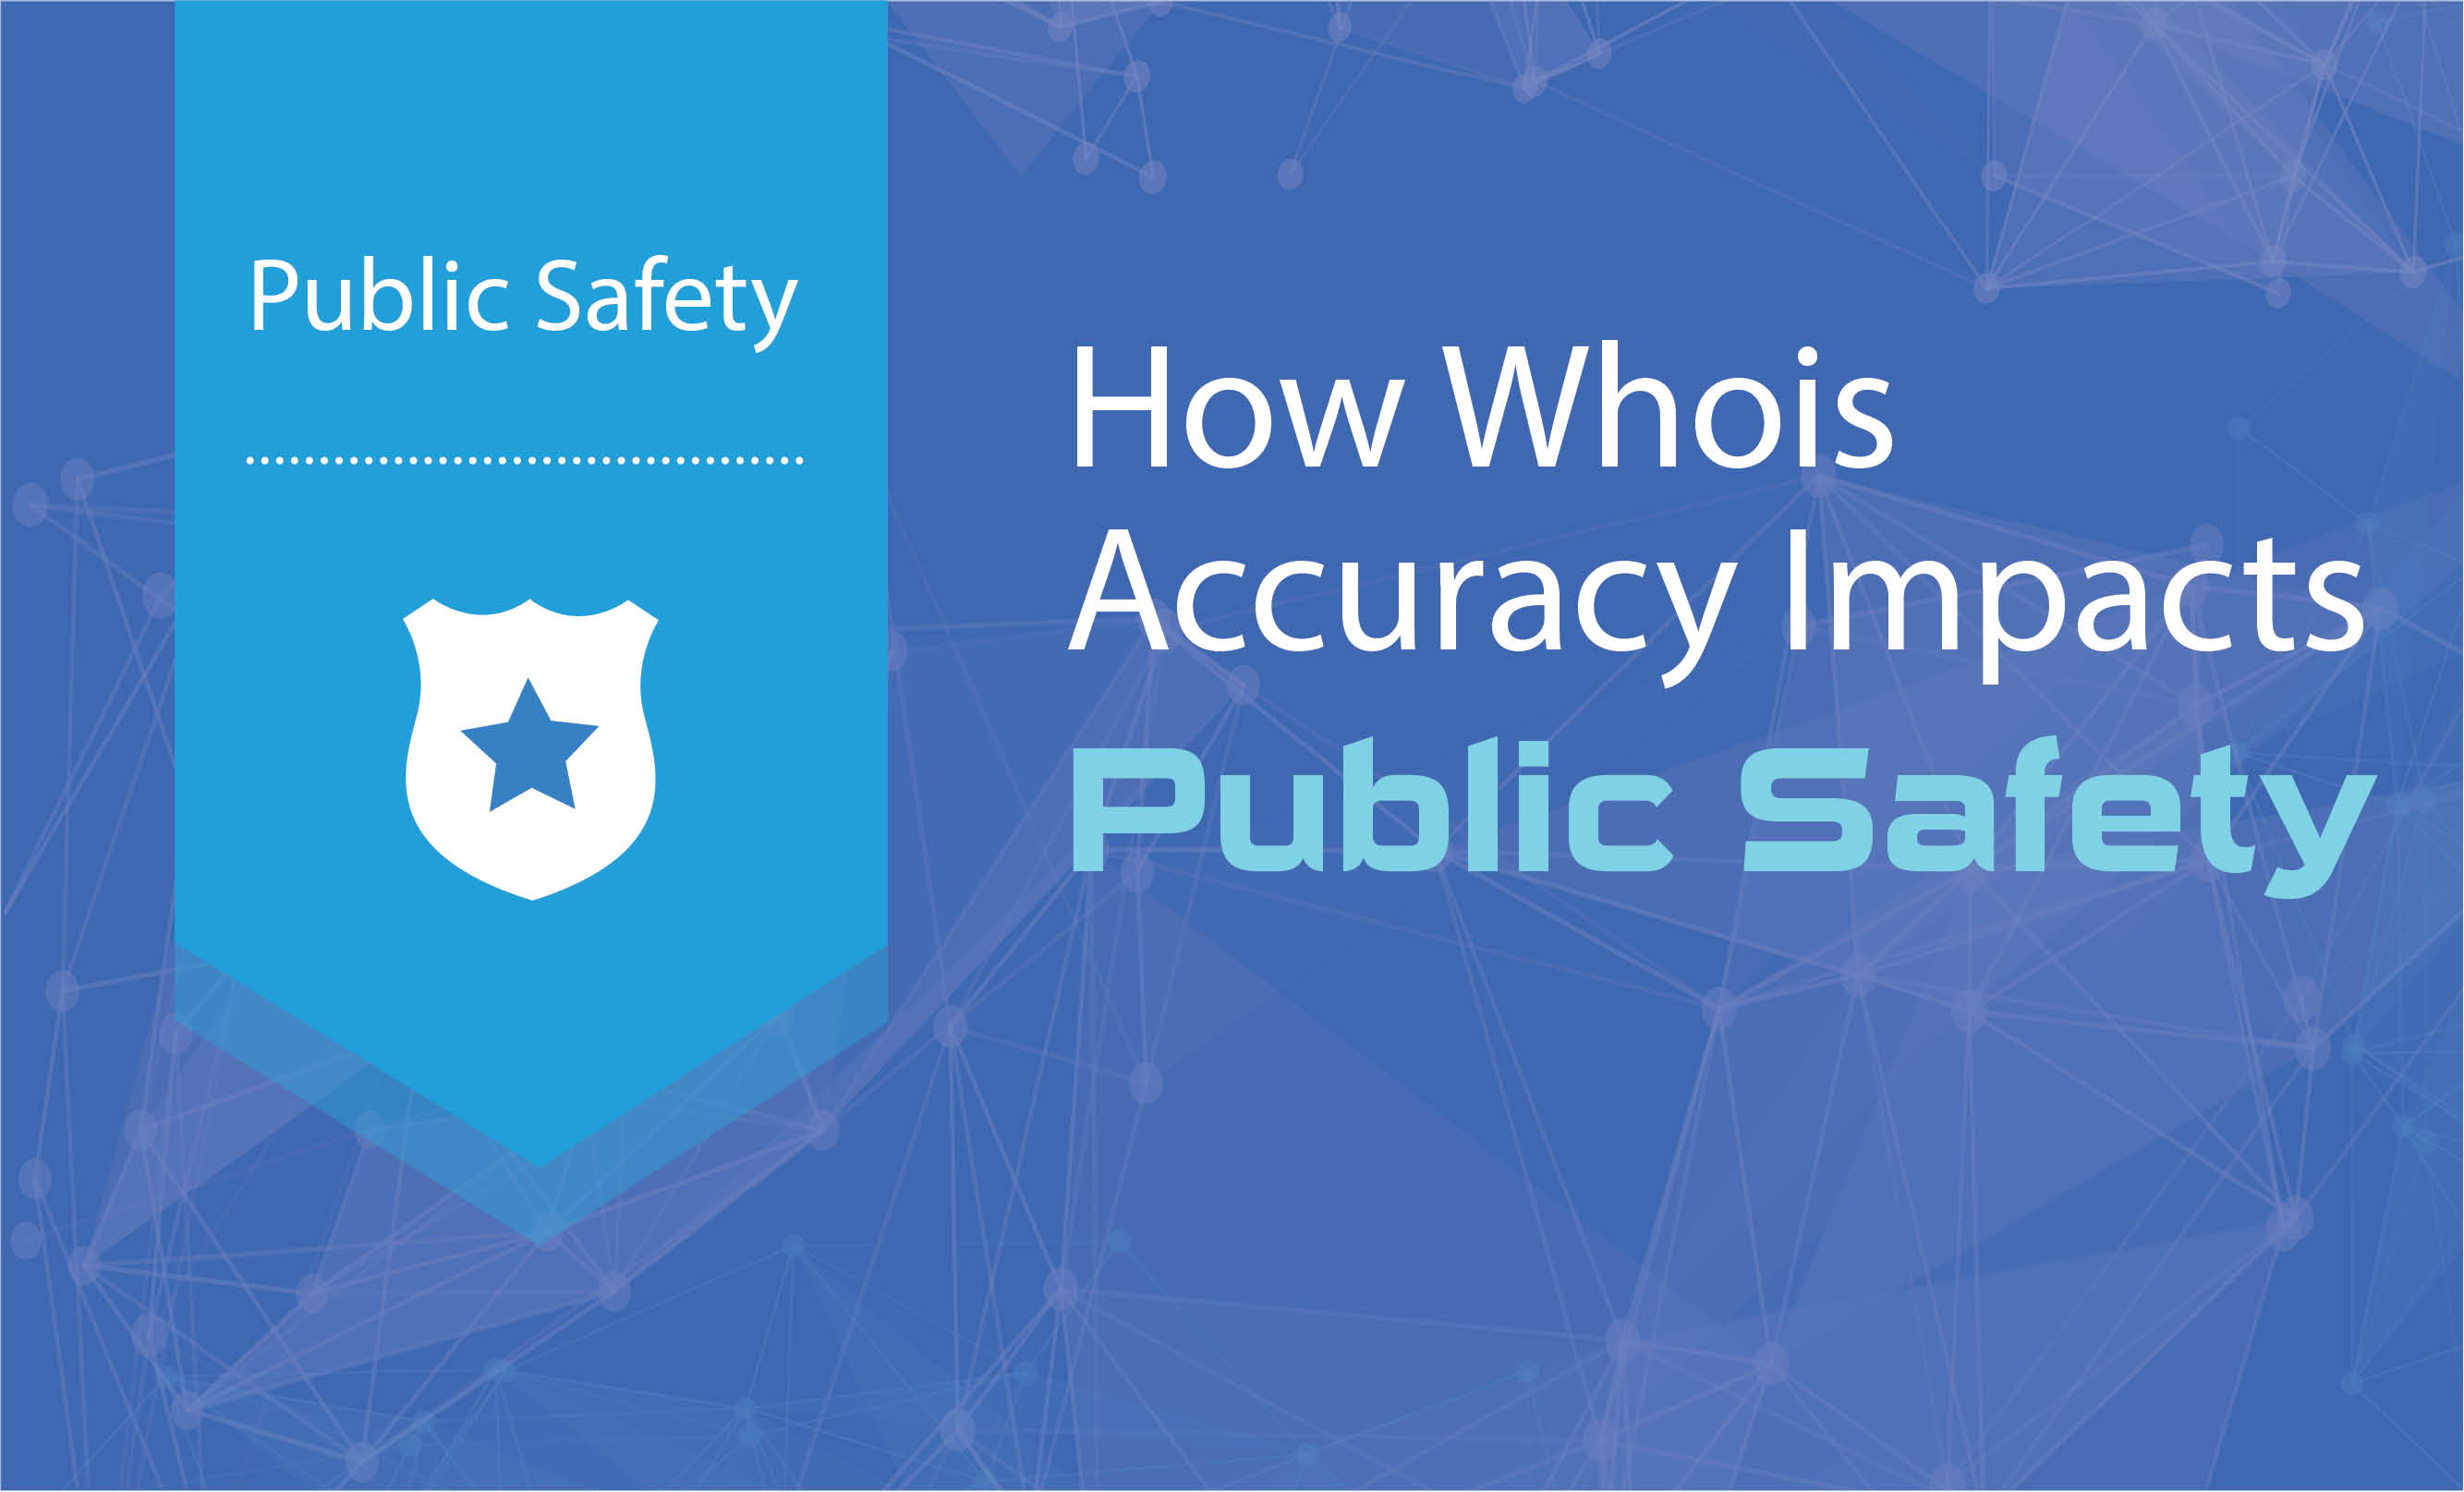 How Whois Accuracy Impacts Public Safety